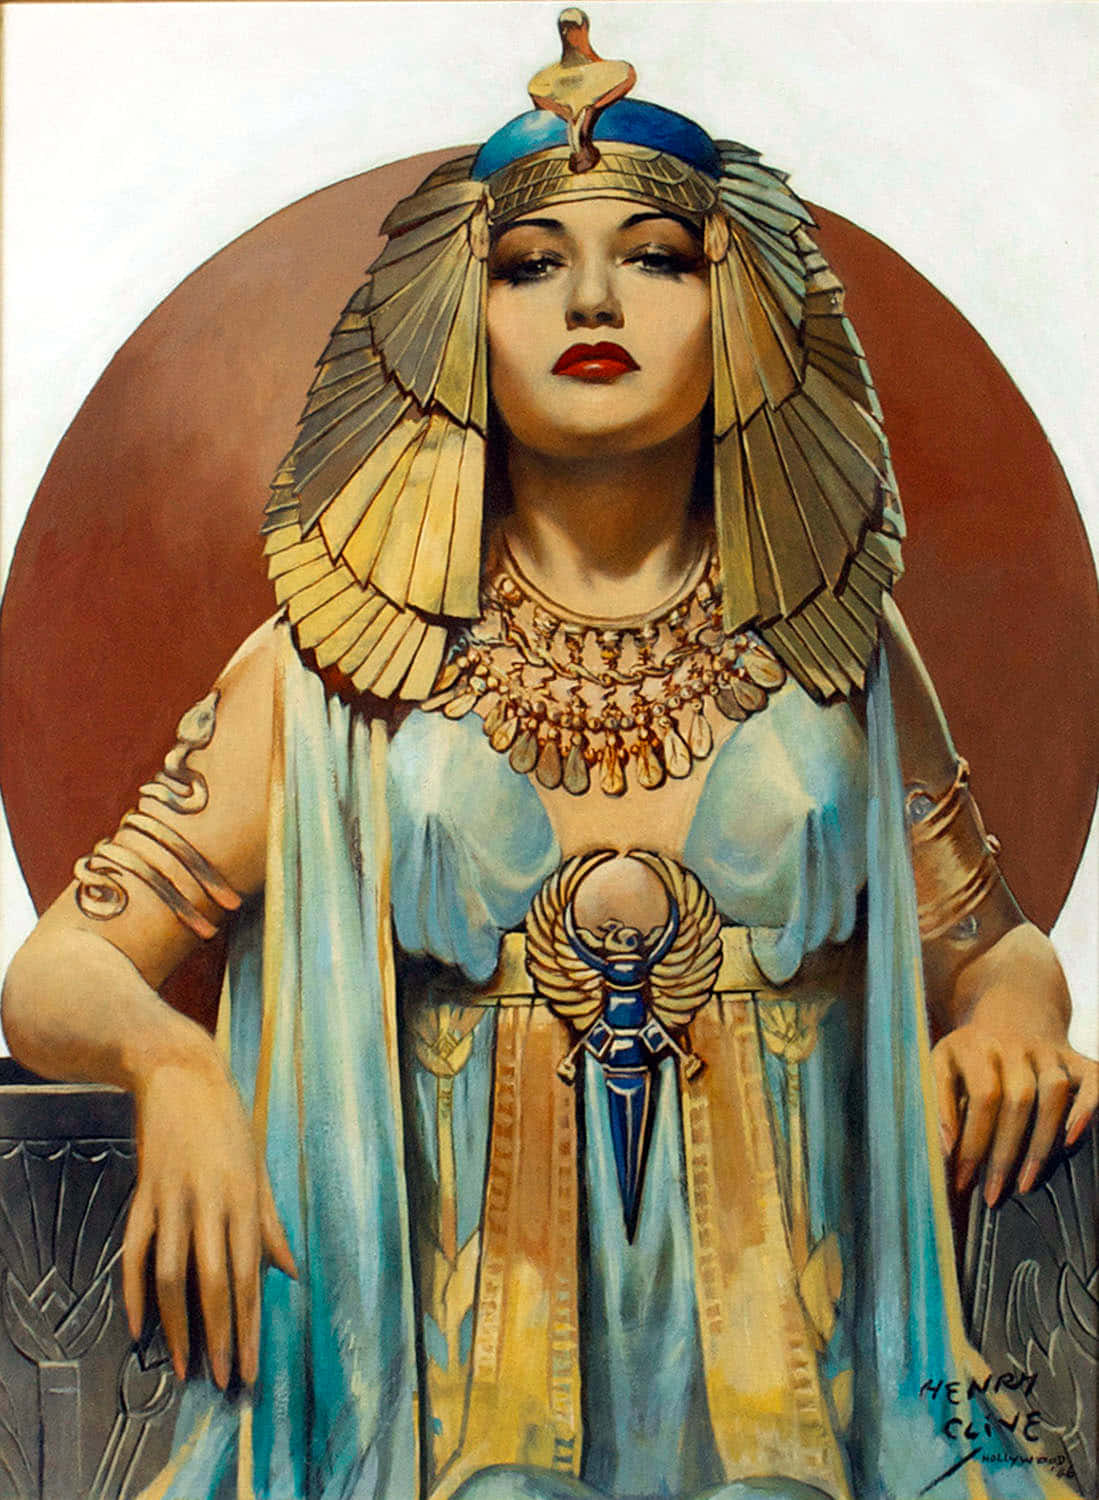 Iconic Egyptian Queen, Cleopatra.